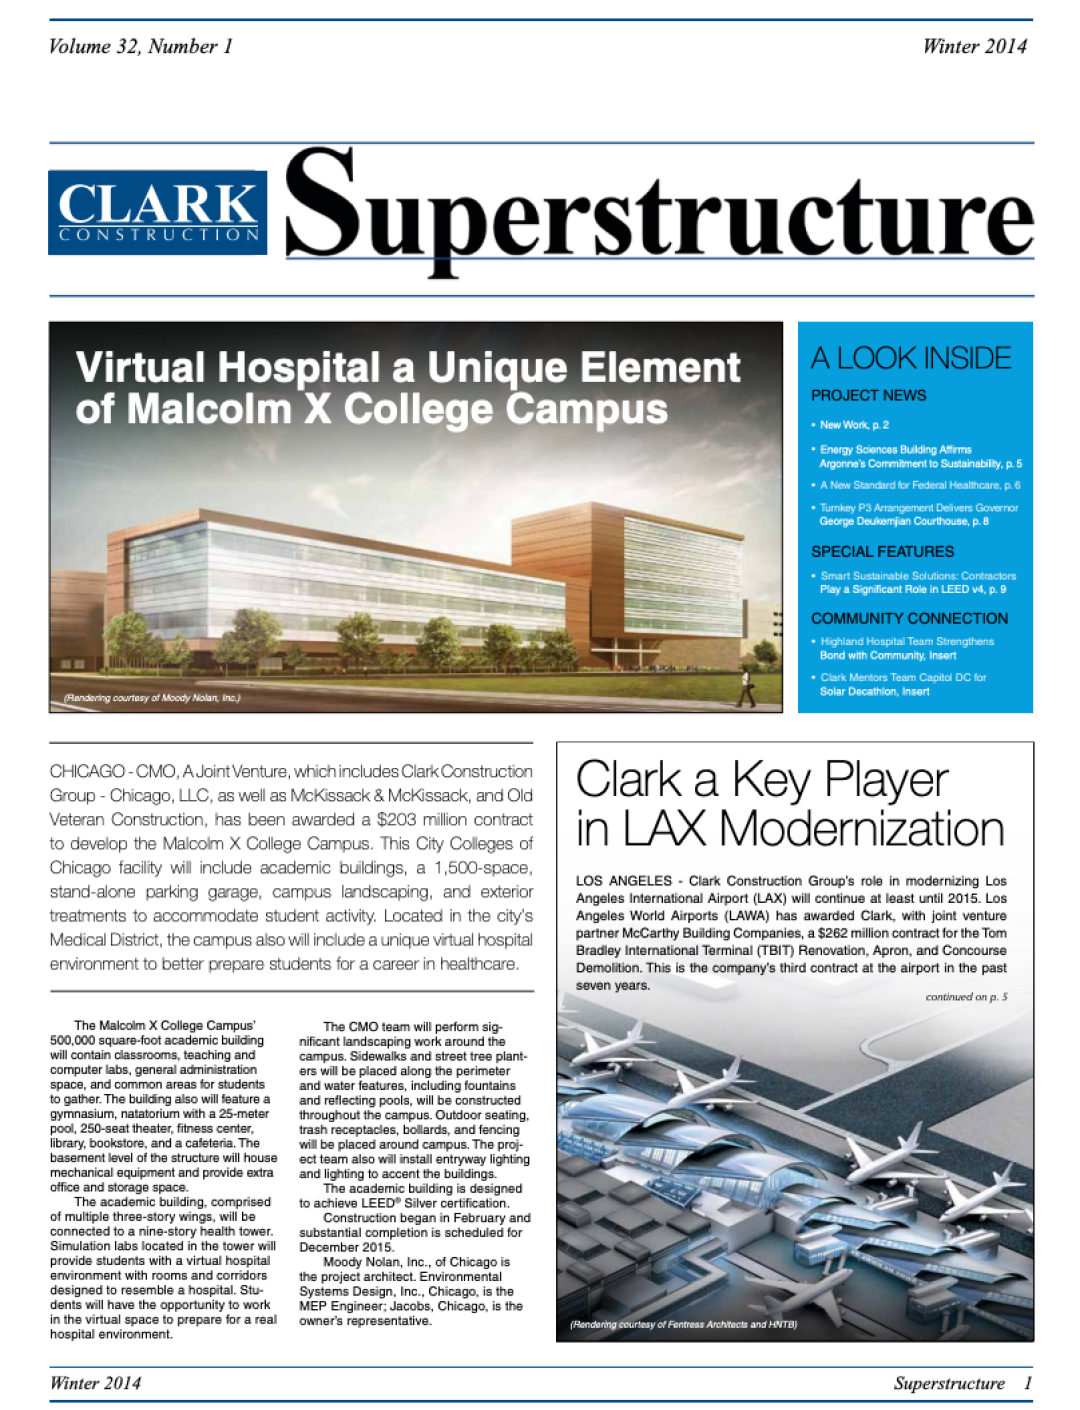 Superstructure Winter 2014